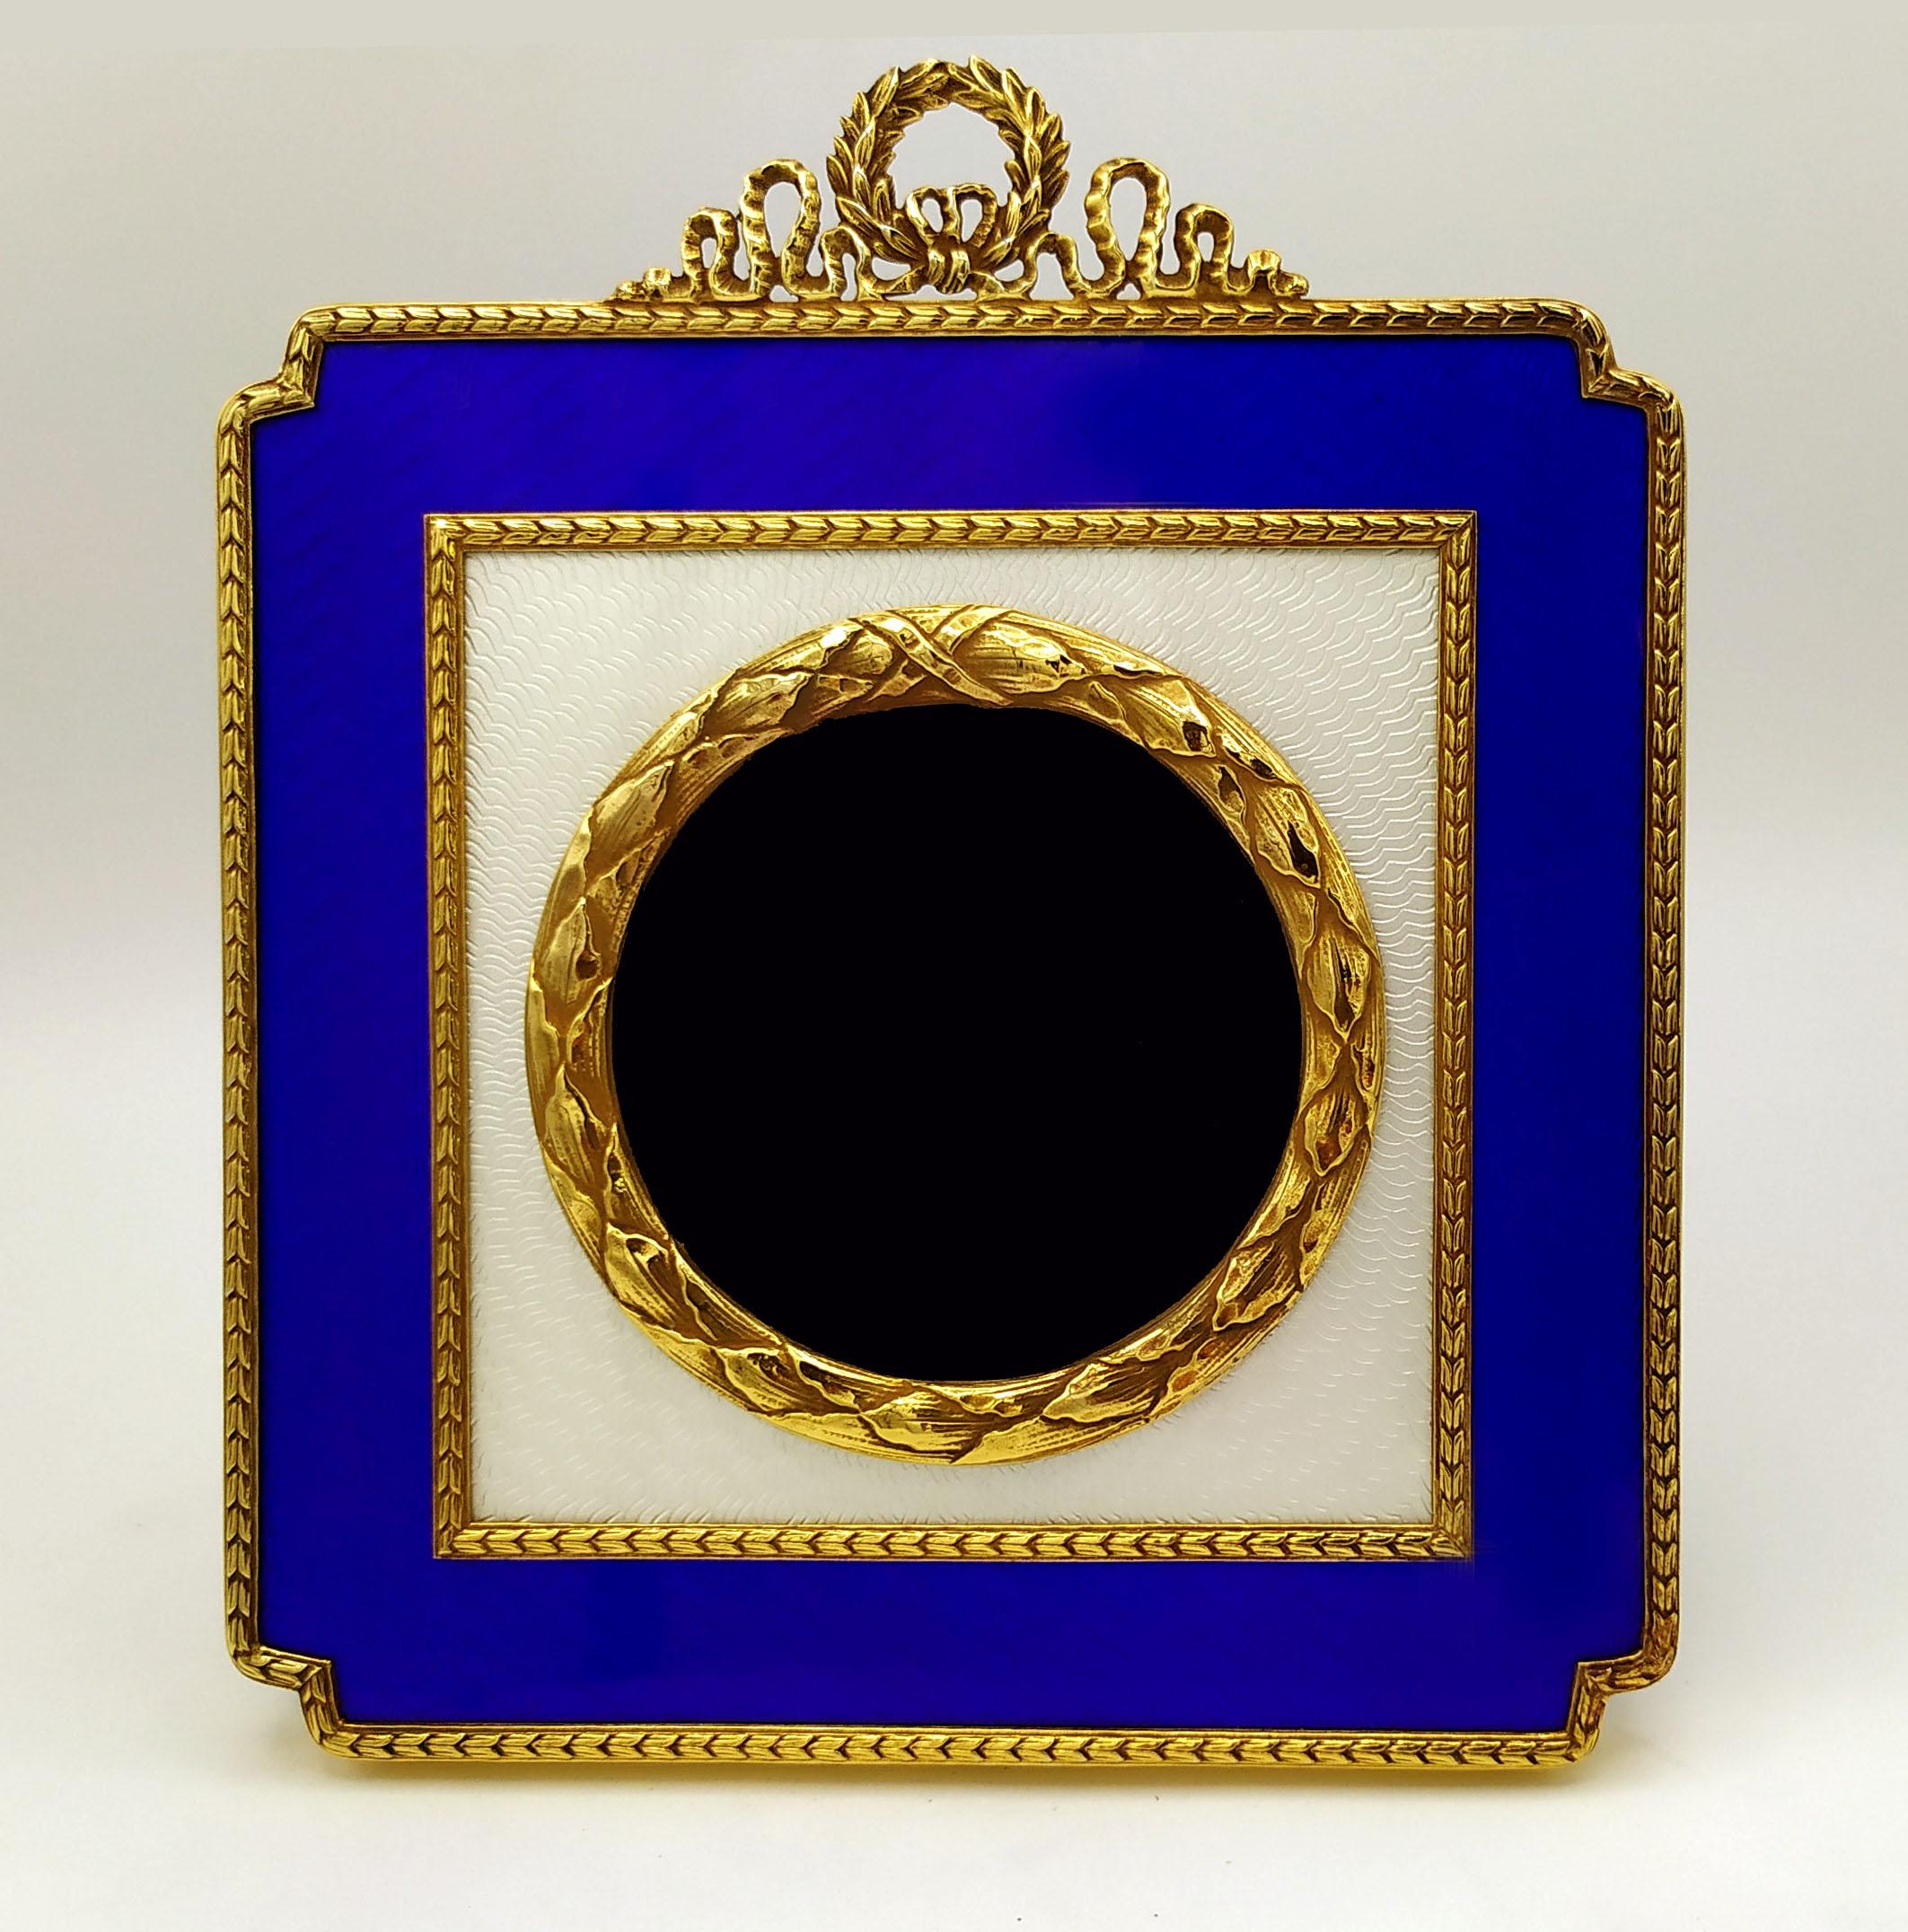 Square table frame for round photos diameter cm. 7, in 925/1000 sterling silver gold plated with translucent two-tone fired enamels on guillochè, with borders and ornaments in the French Empire Napoleon III style. External cm. 14.5 x 14.5. Weight